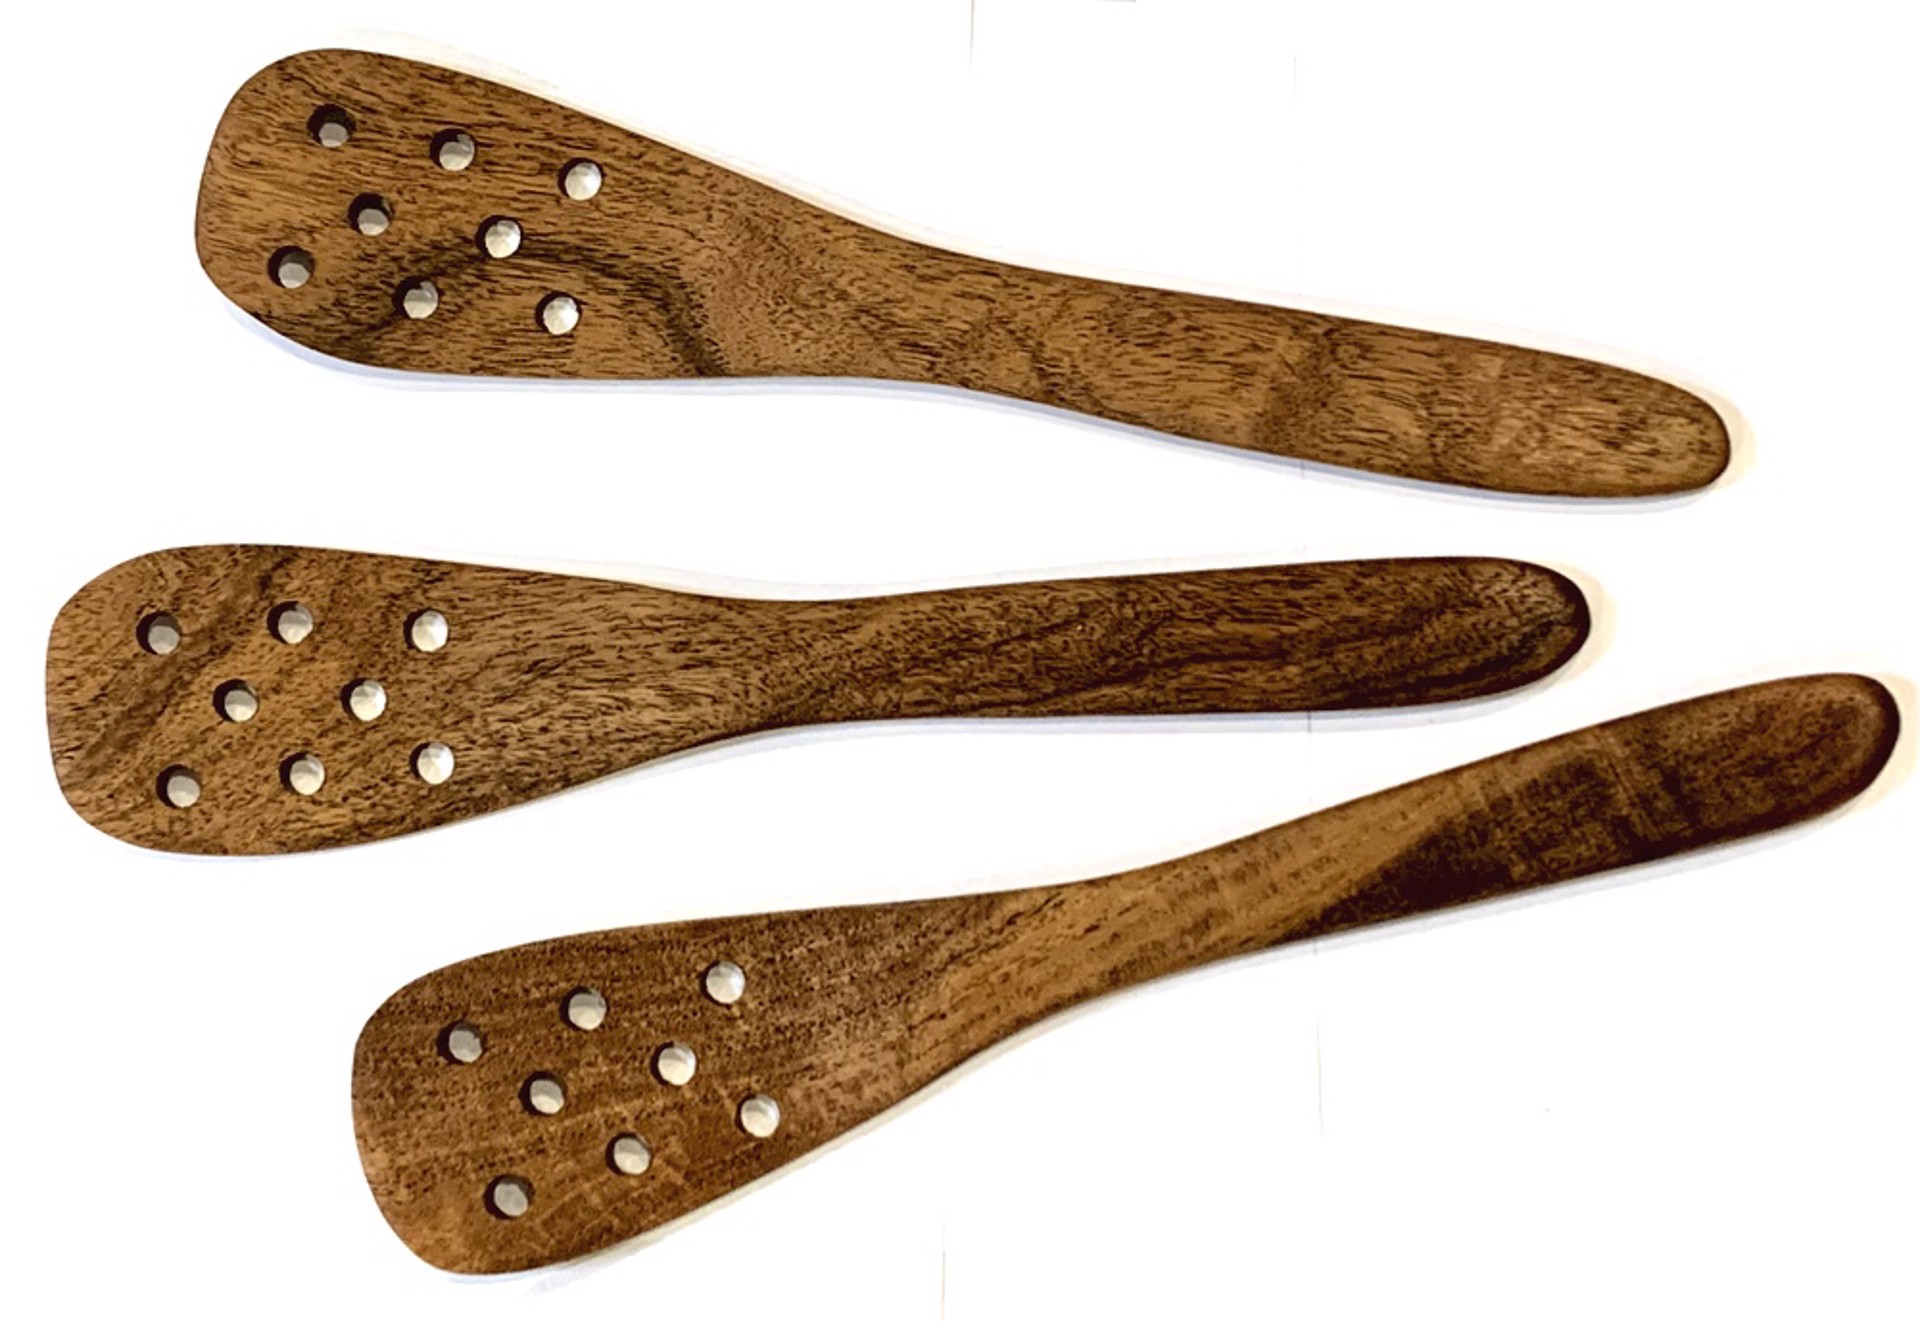 Utensils - Mesquite Slotted Spoon - Assorted by TreeStump Woodcraft